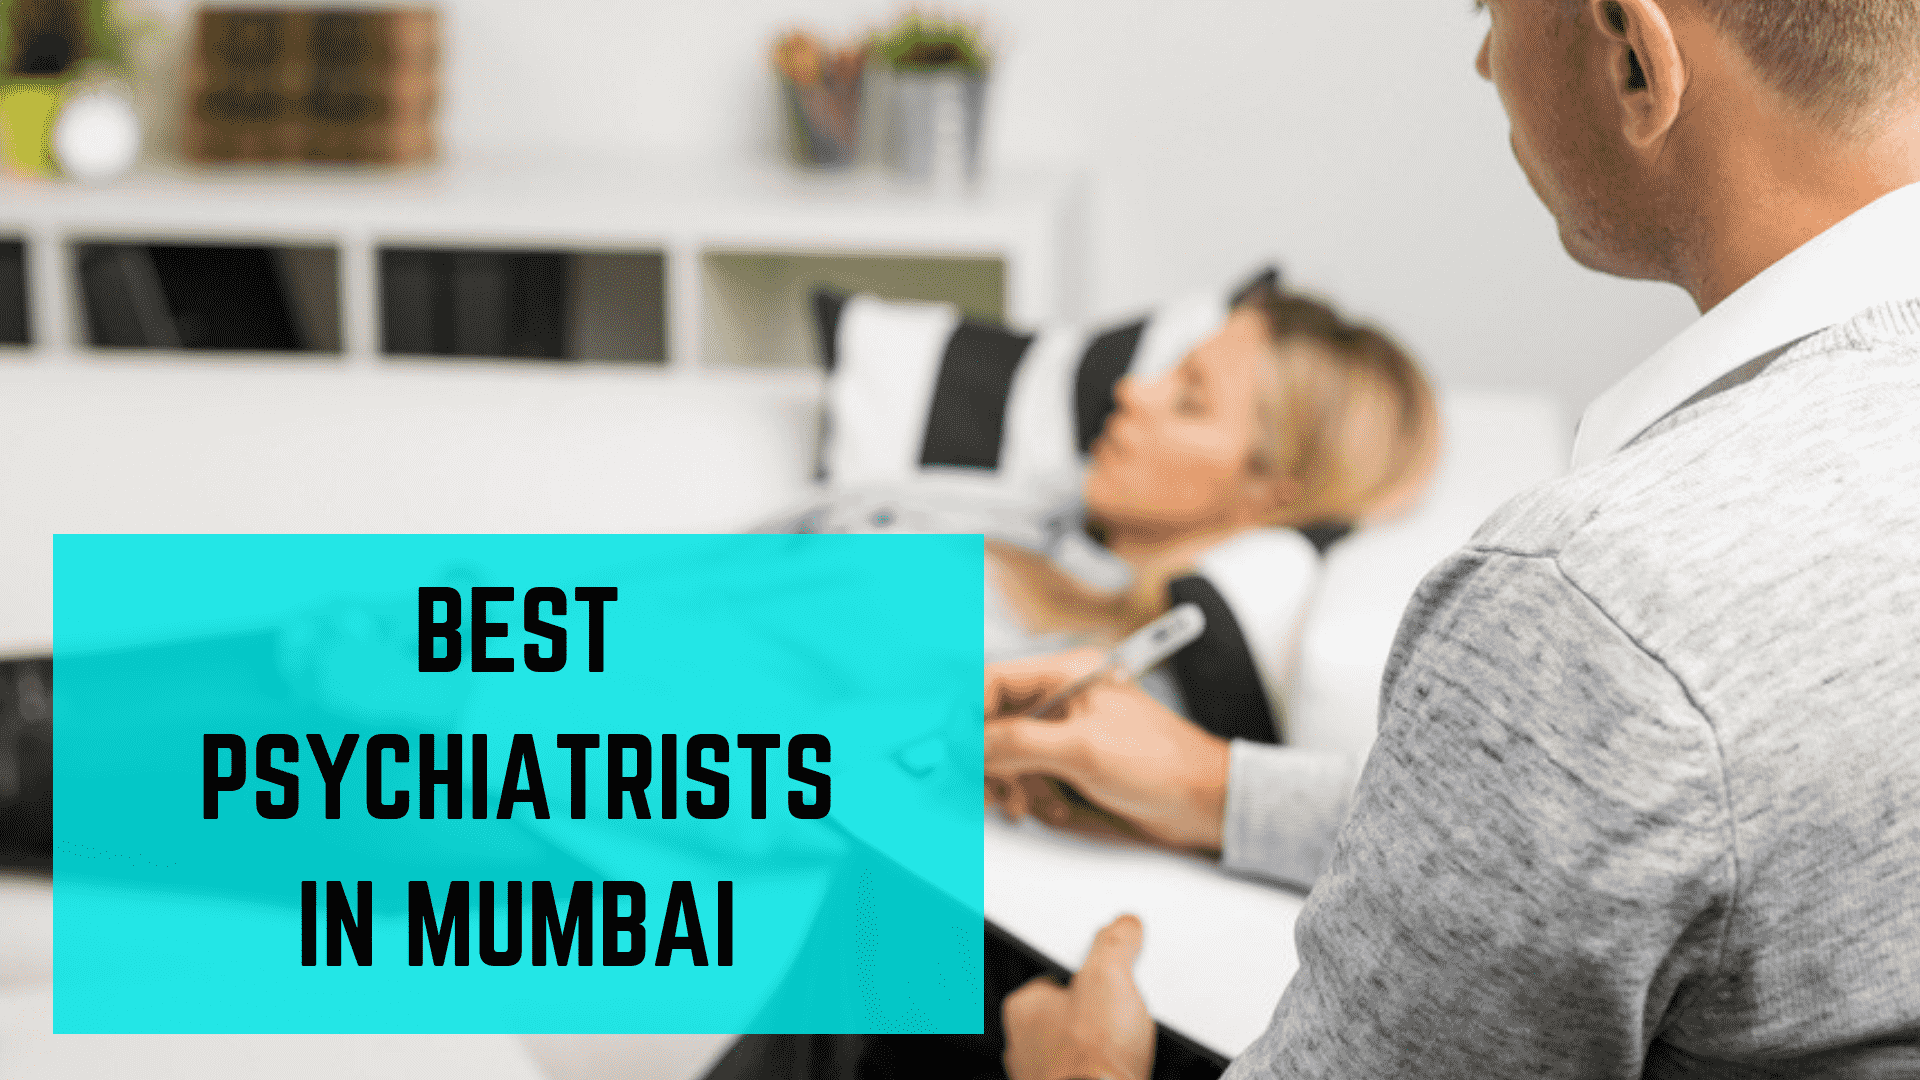 What Support Services Do Top Psychiatrists Provide Alongside Depression Treatment in Mumbai?